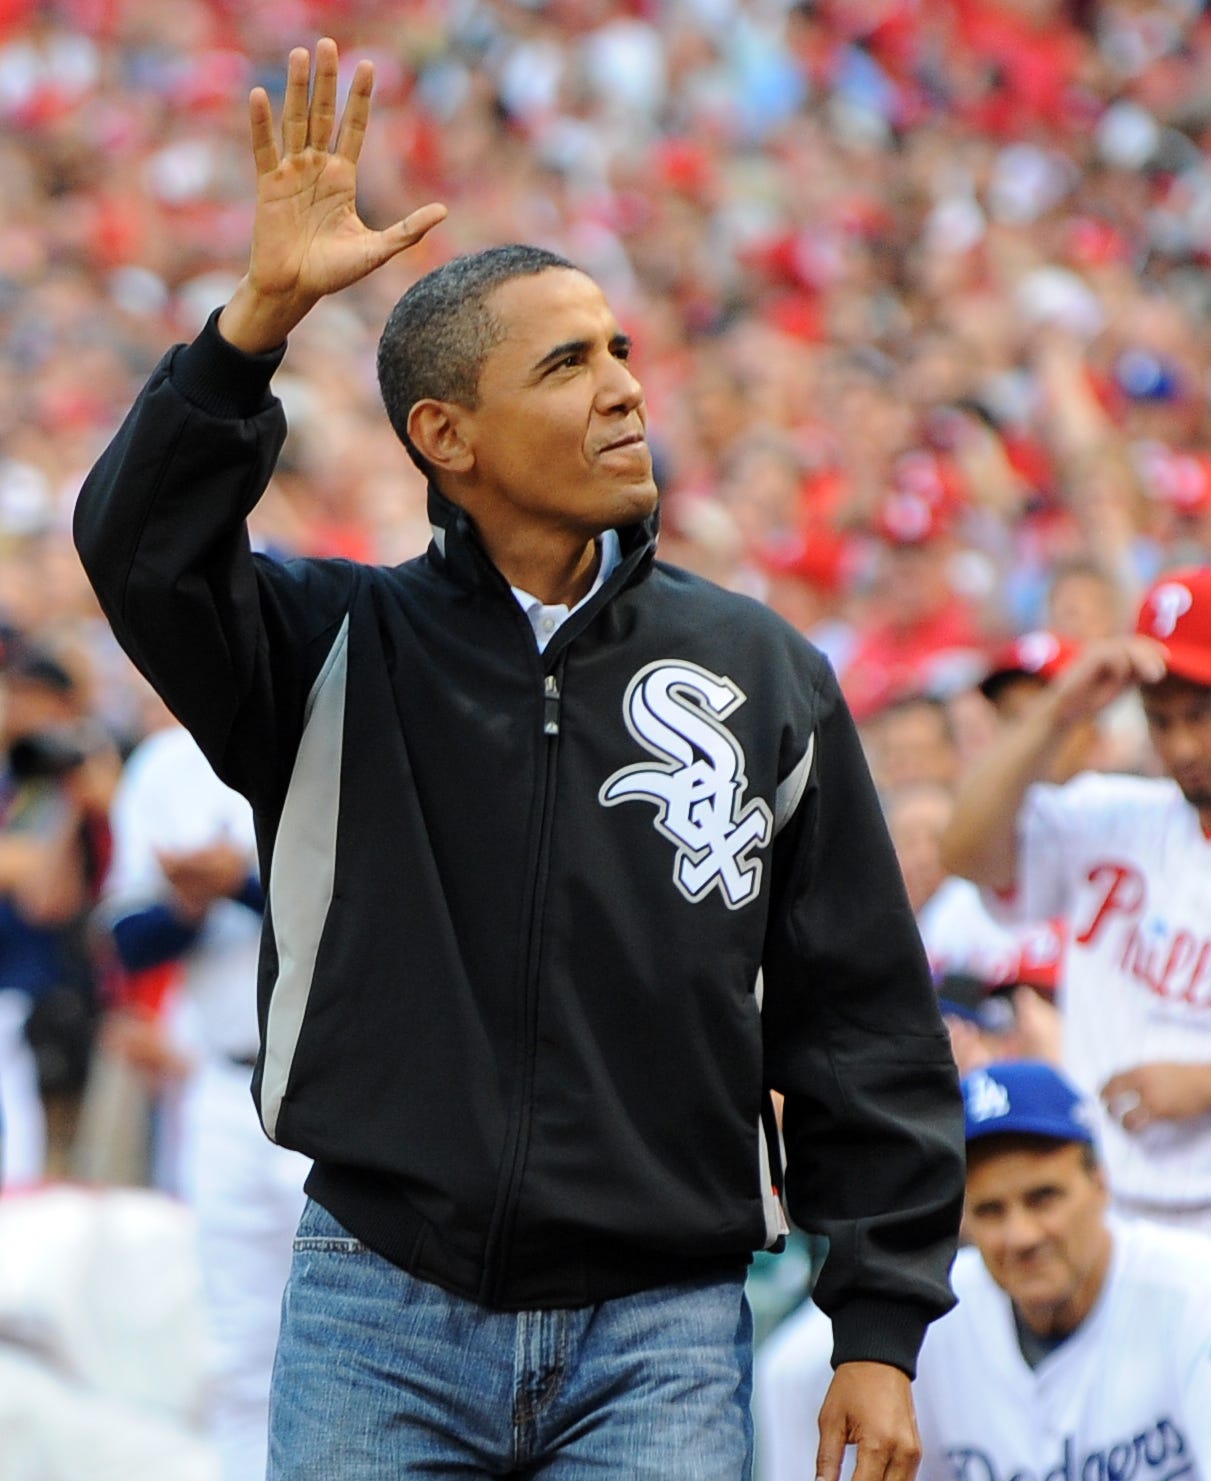 A Presidential Pastime. Given baseball's status as America's…